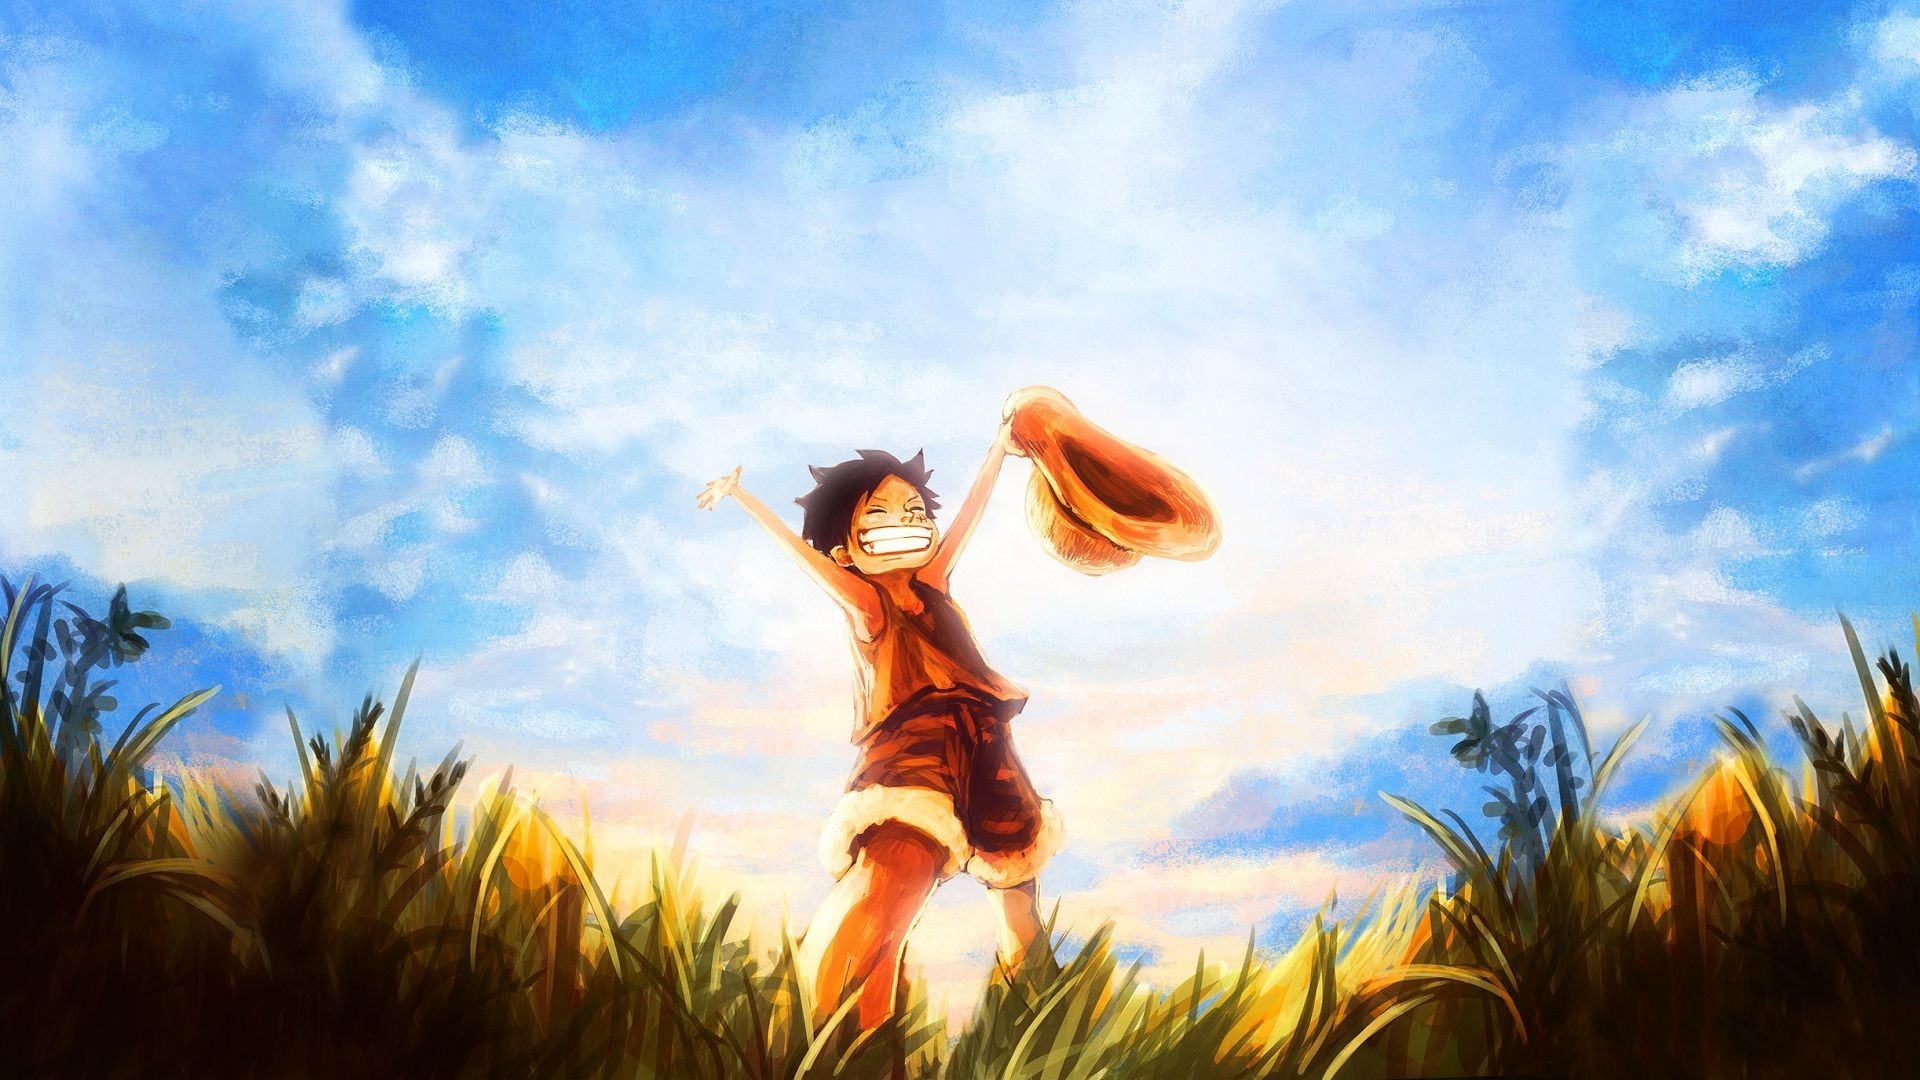 1920x1080 2560x1600 HD One Piece 3D Pictures Widescreen, WR.398